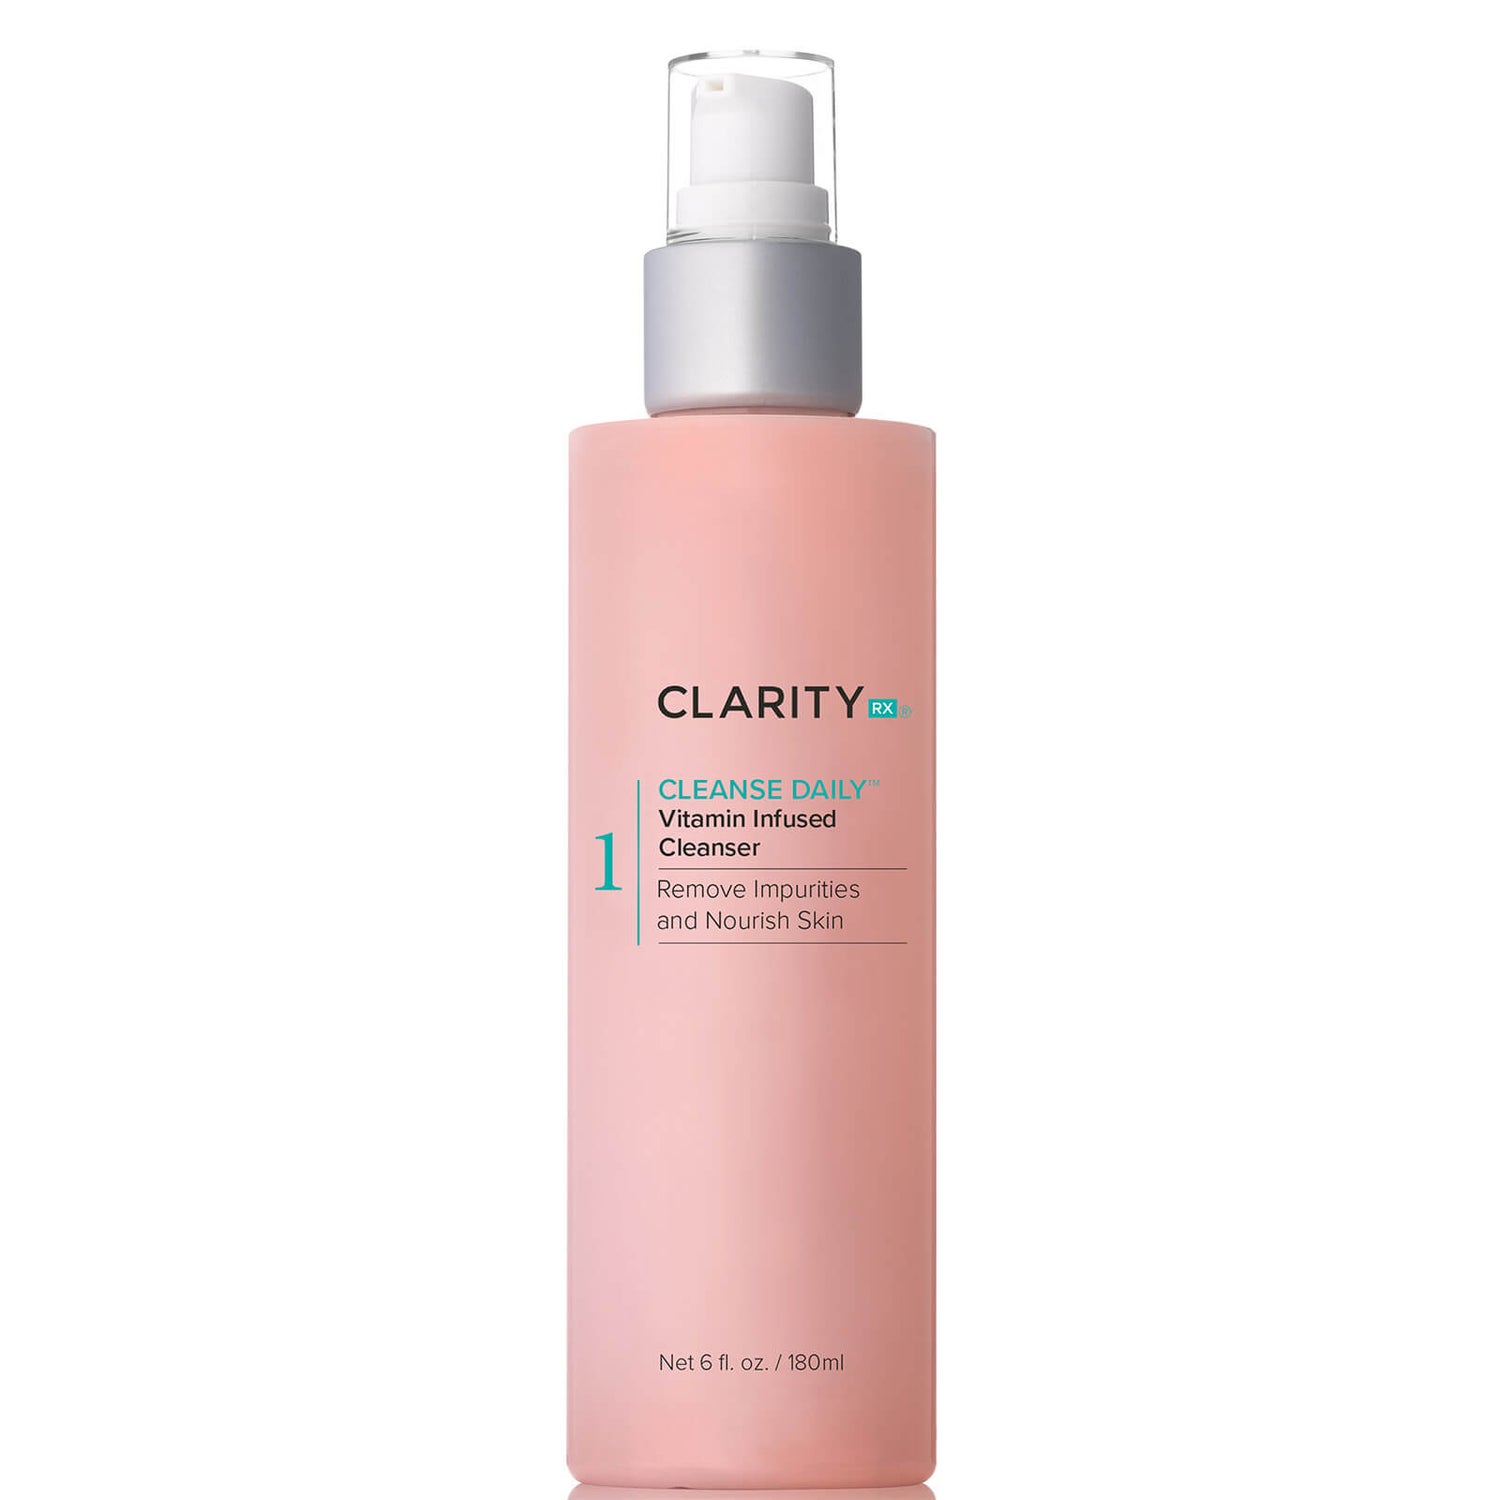 ClarityRx Cleanse Daily Vitamin-Infused Cleanser 6 oz